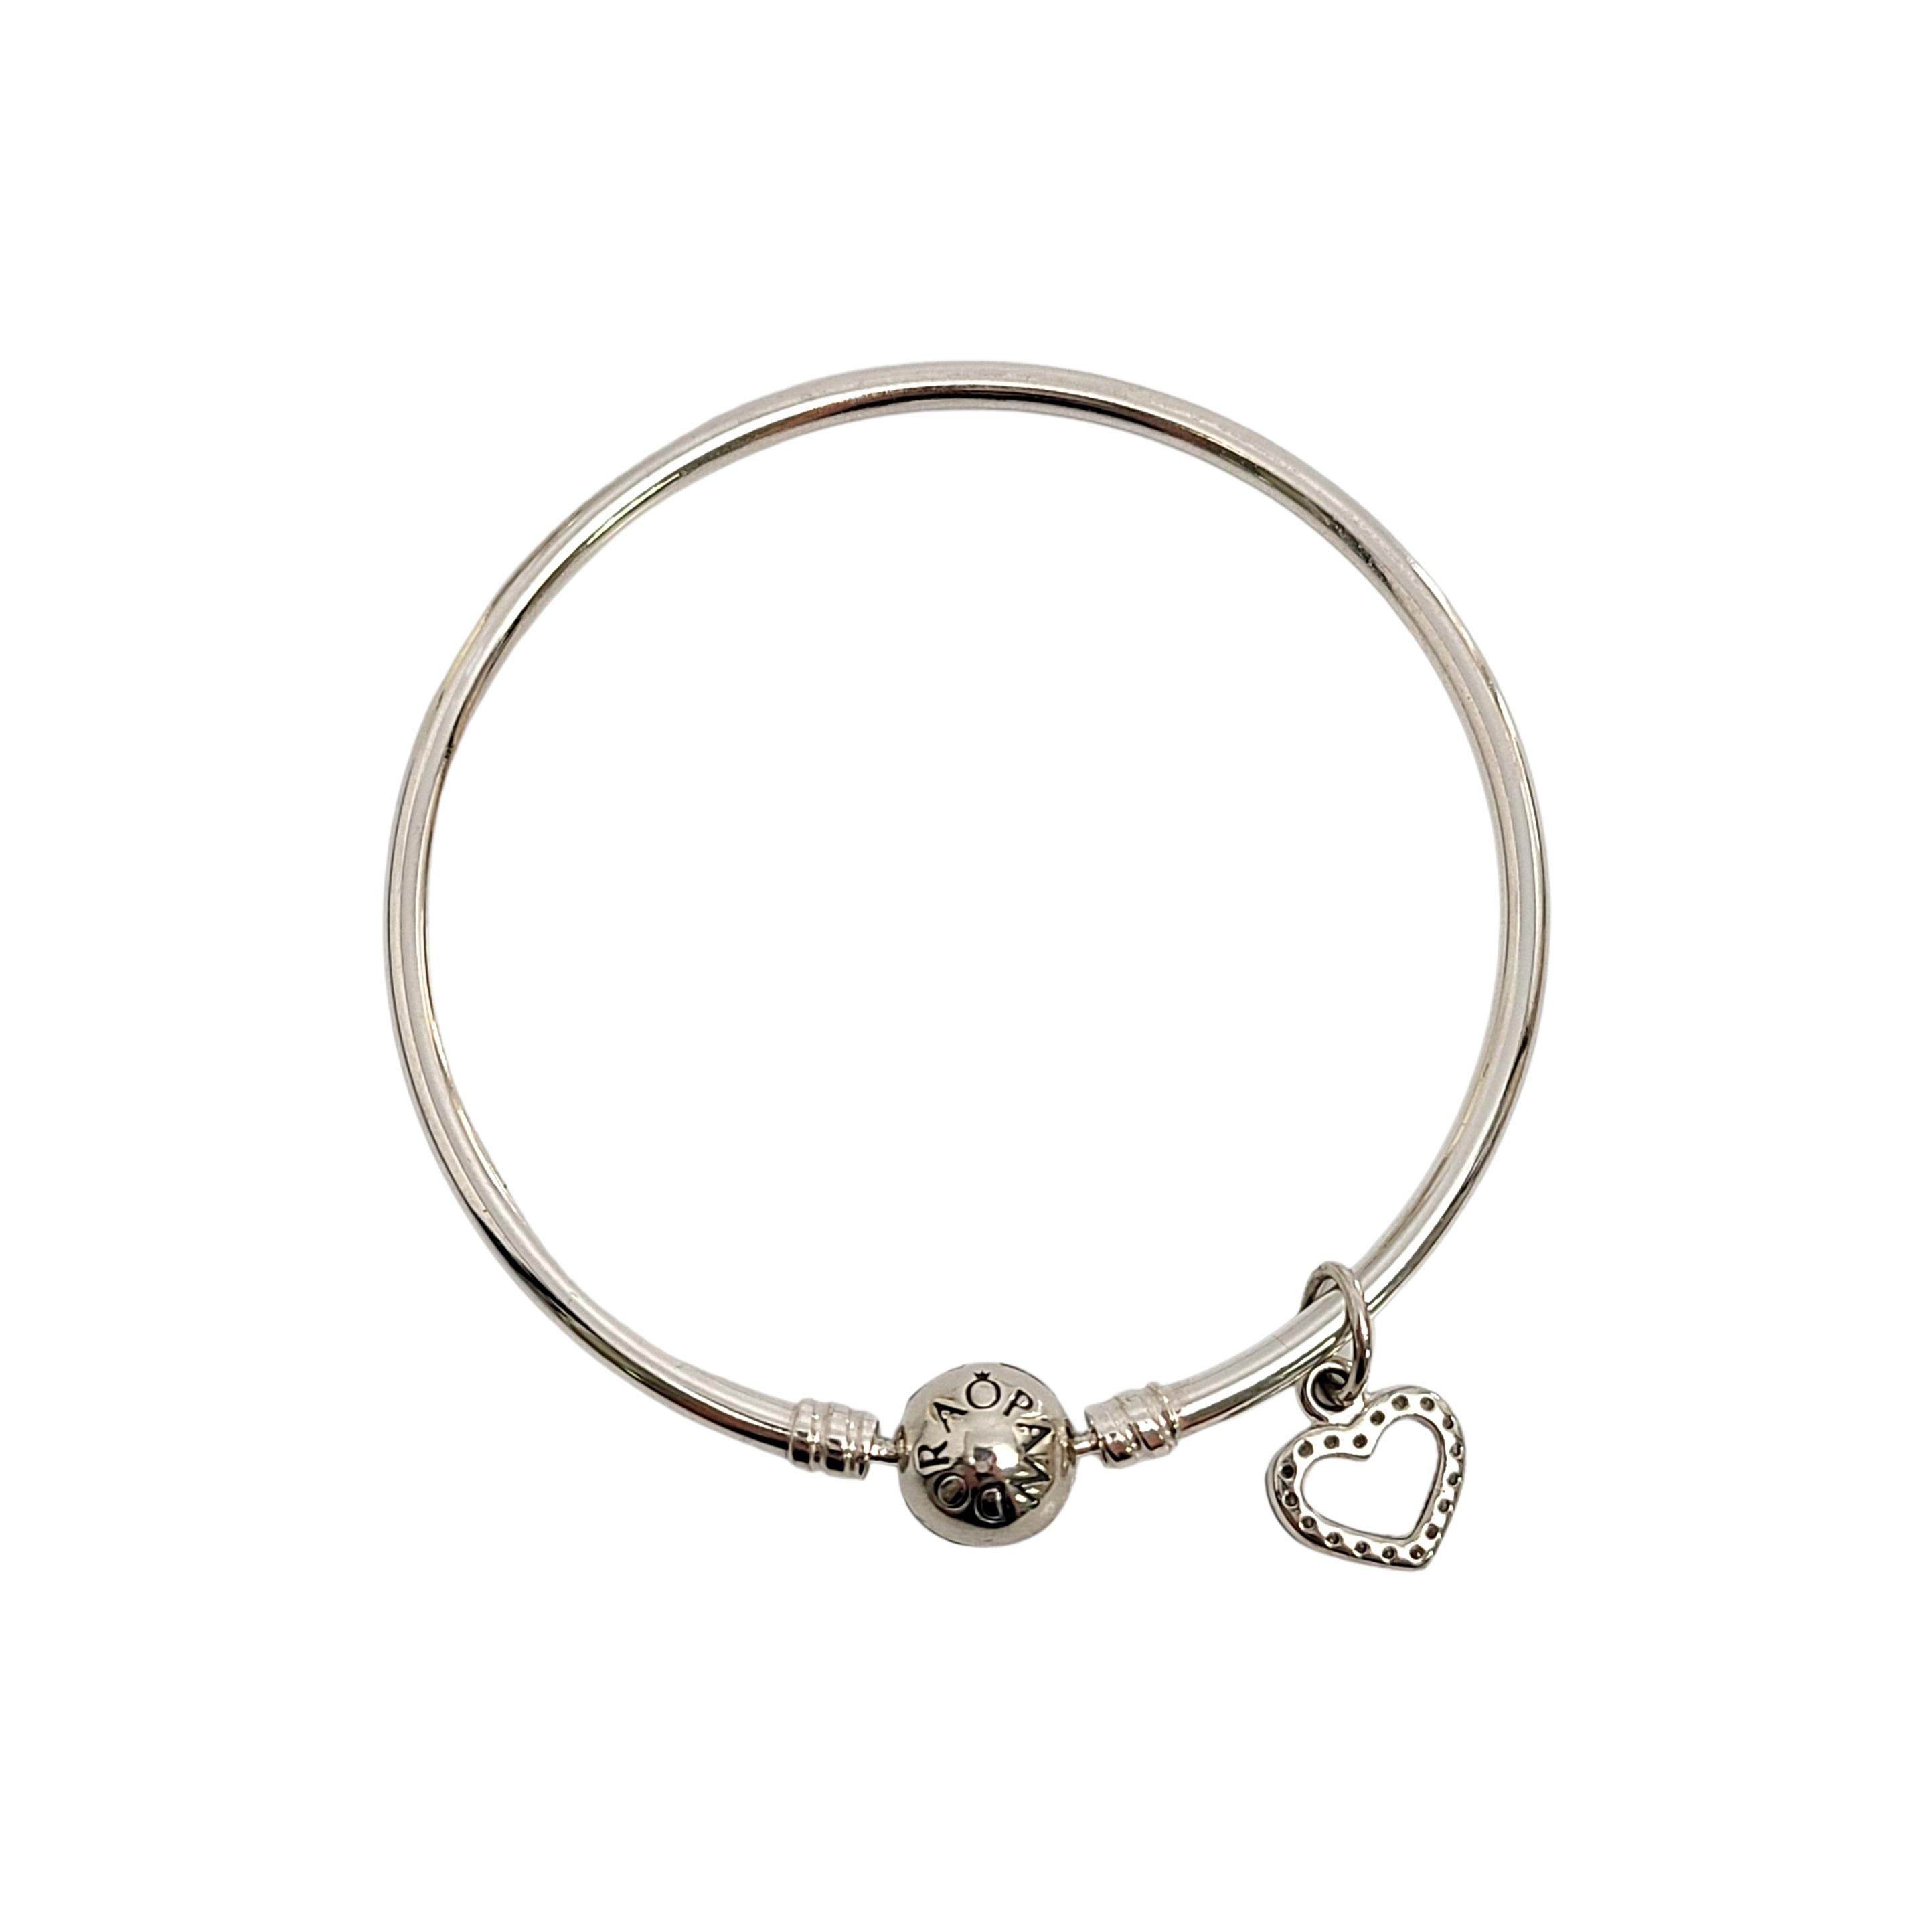 Pandora sterling silver bangle bracelet with CZ heart dangle.

Size 7.5

This lovely Pandora bangle bracelet features an open CZ heart dangling. Clip design closure.

Weighs approx 6.7dwt, 10.4g

Marked Pandora on clasp, S925 ALE inside clasp and on